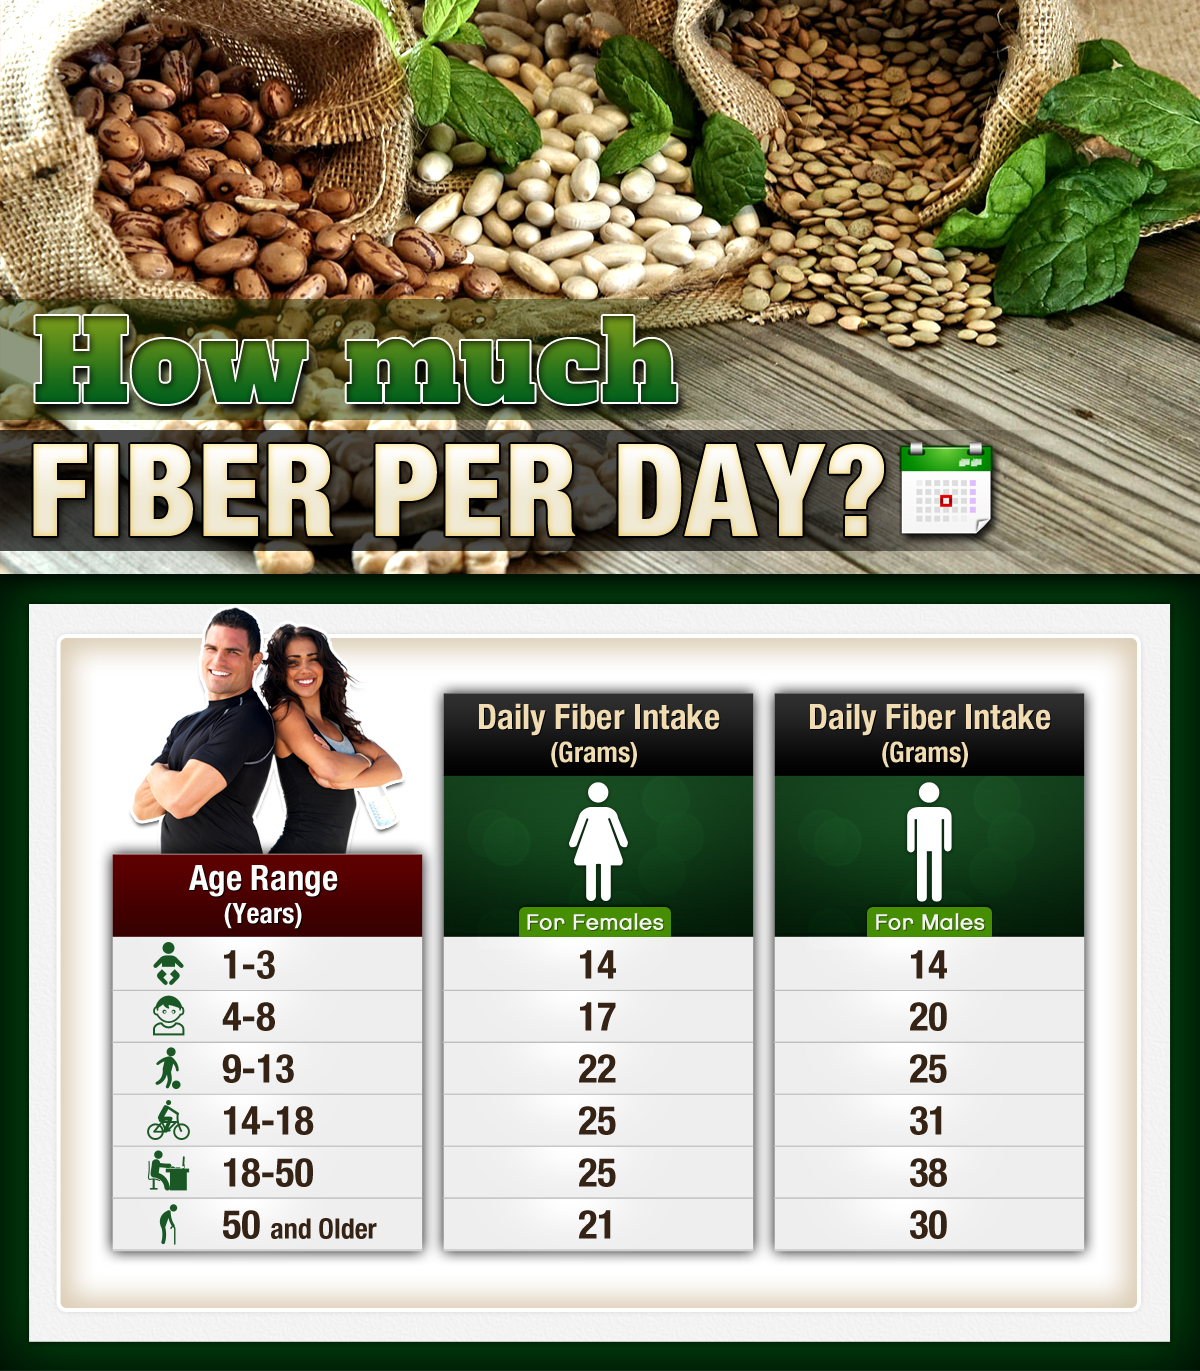 How Much Fiber Should You Eat?